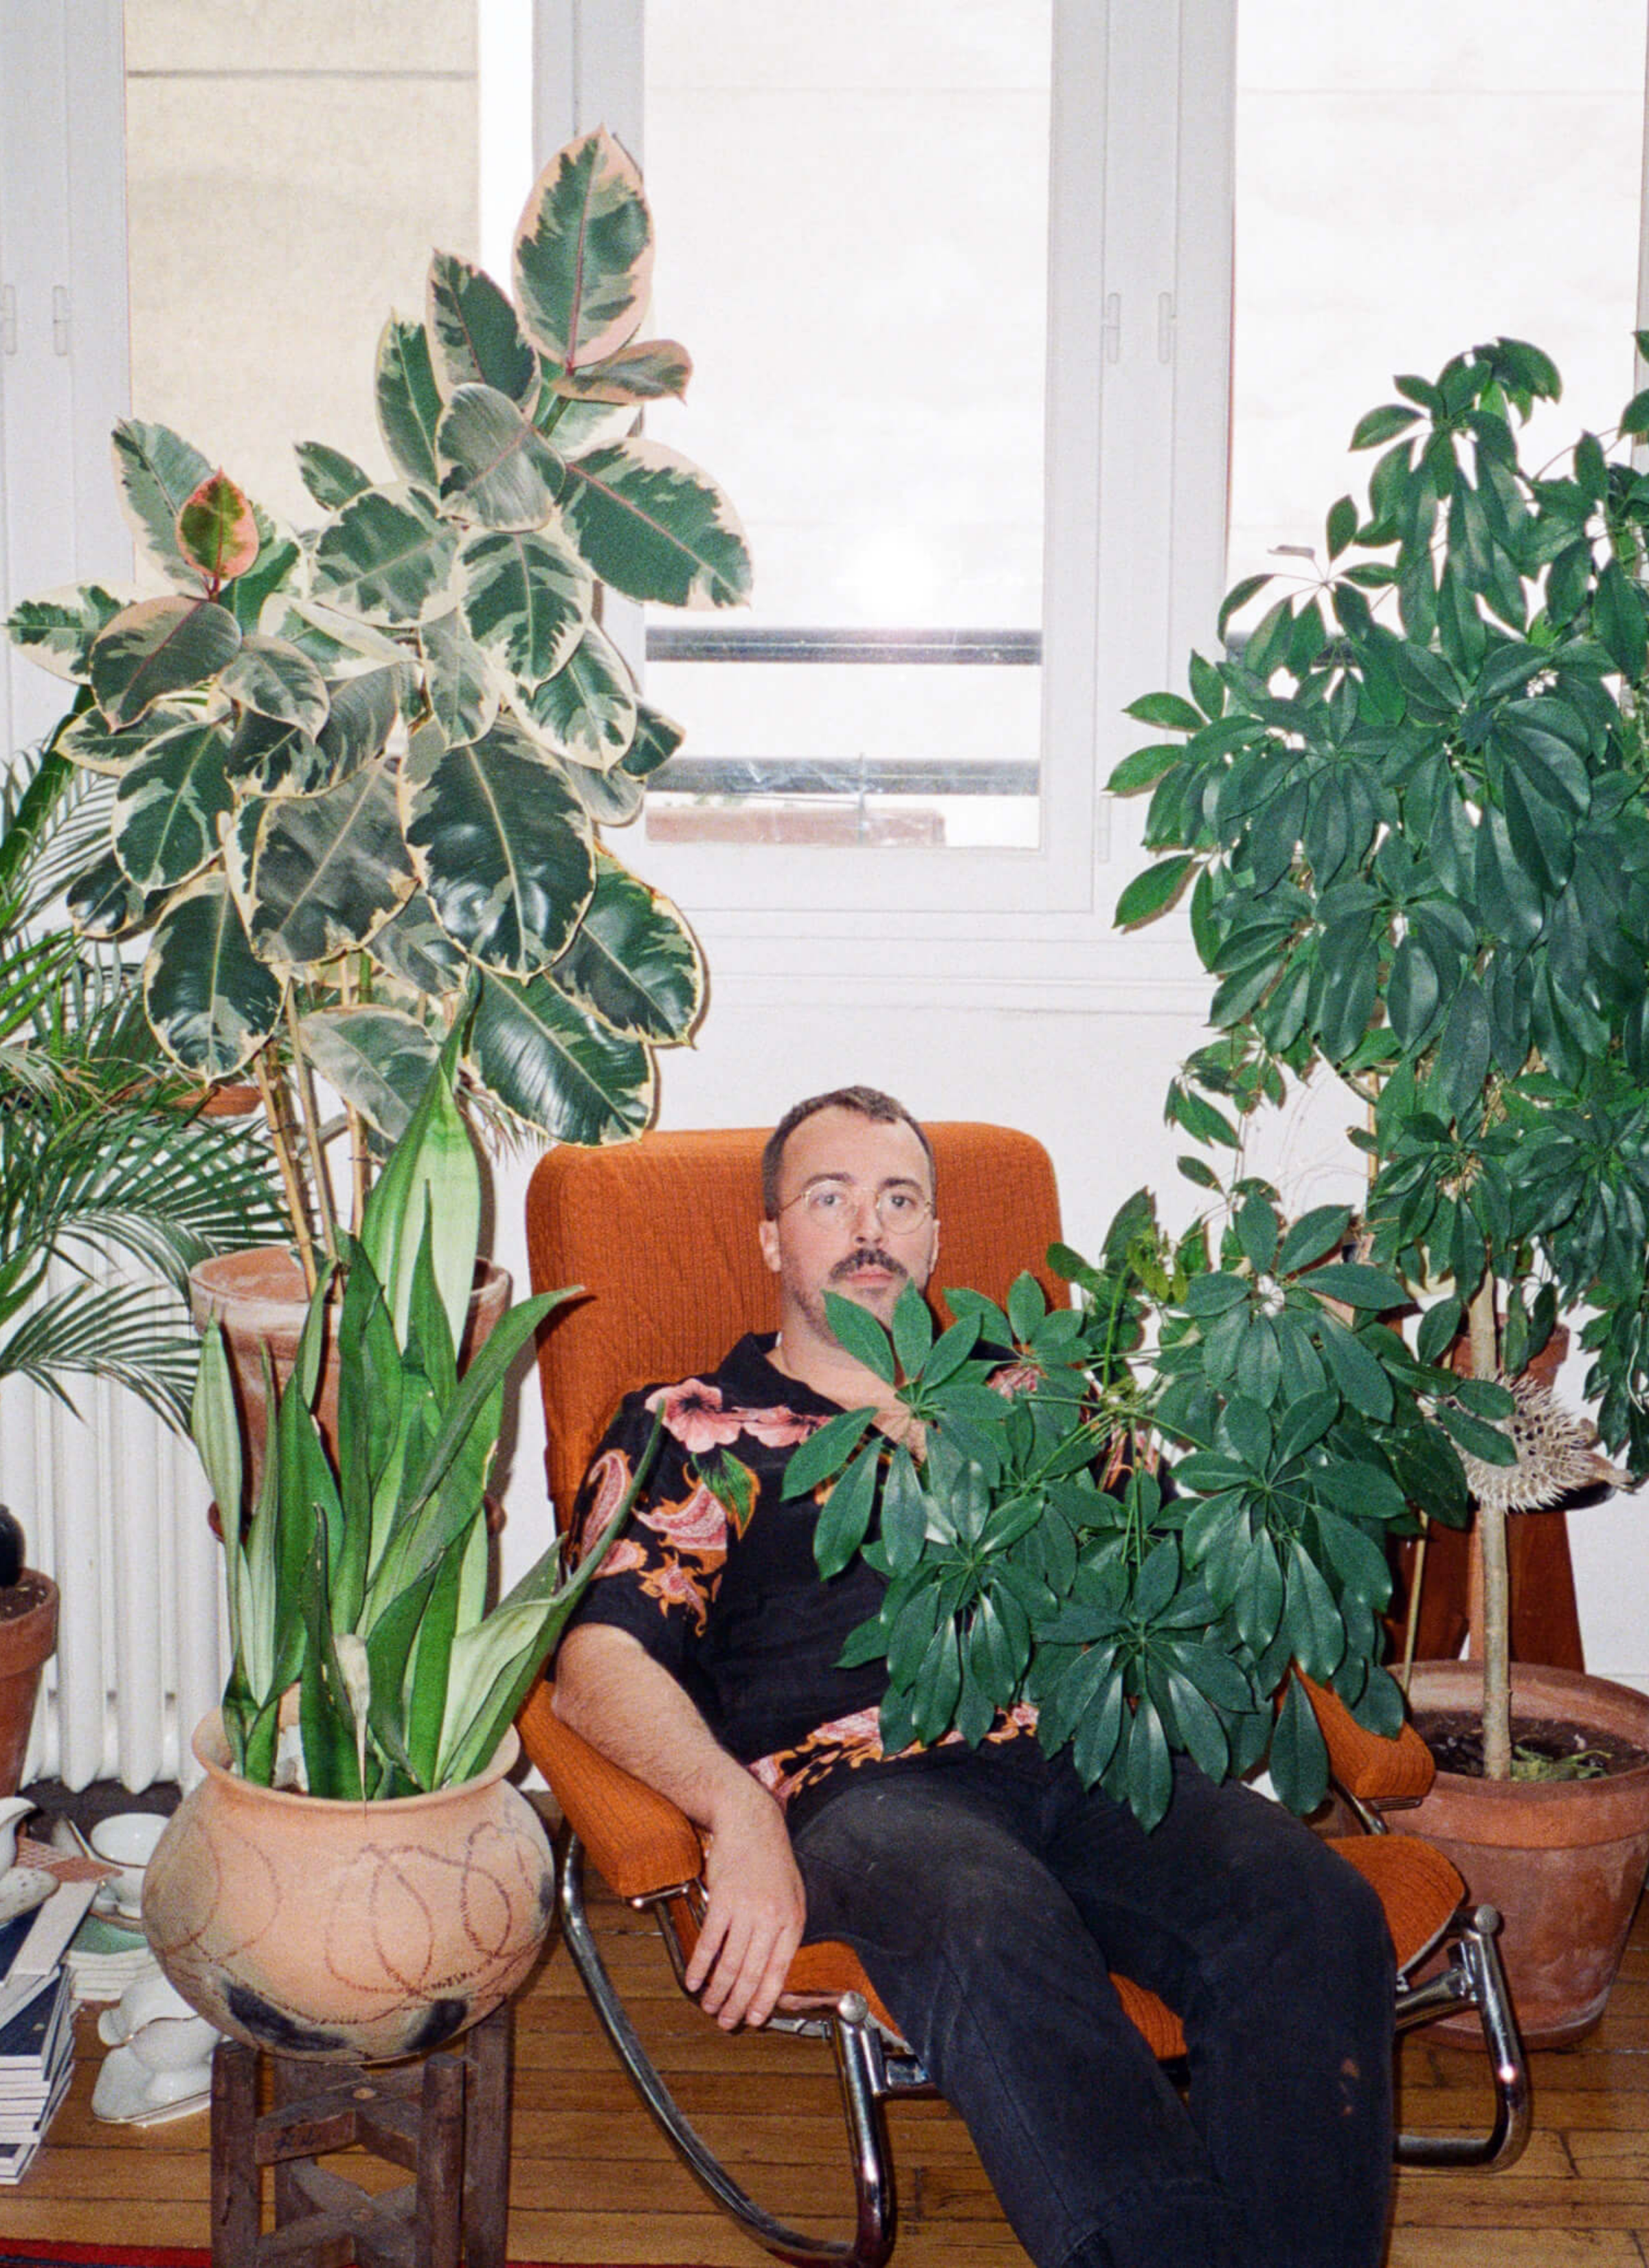 Arnold sit on a sofa chair surrounded by different types of his house plants, including elastica ficus tineke, snake plant, umbrella tree and etc.